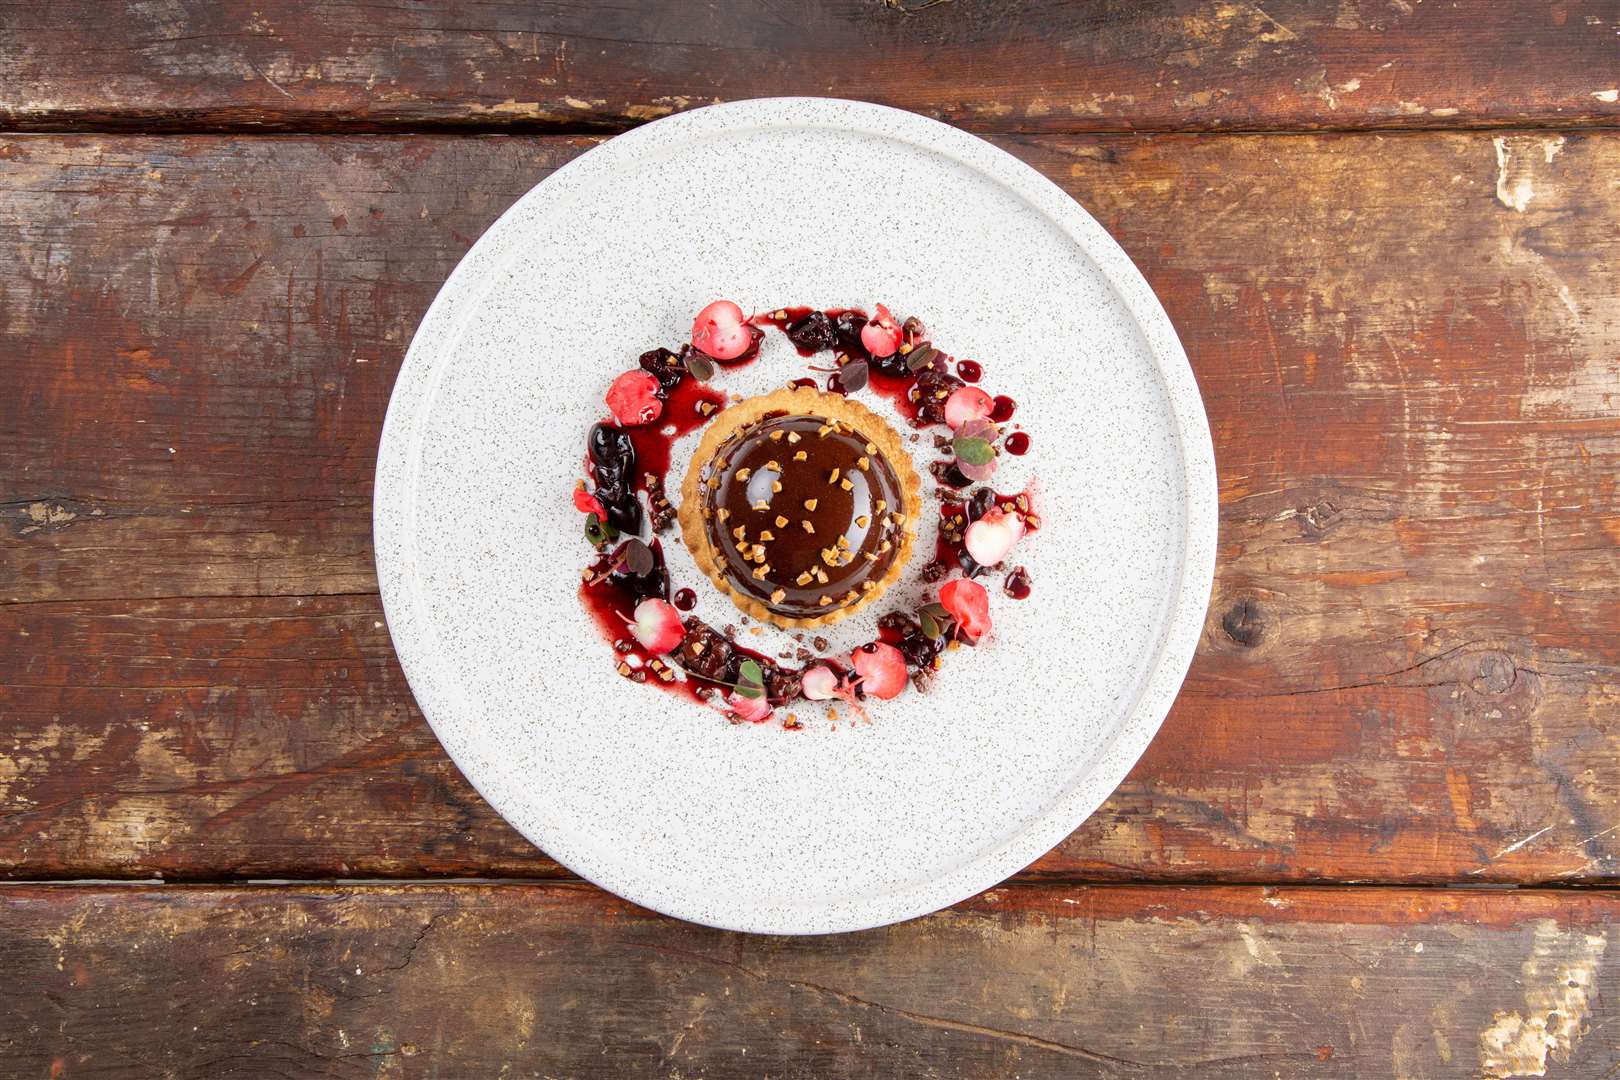 The millionaire's shortbread dessert is another example of Robbie taking retro dishes and putting his modern culinary twist on it. Picture: Only Food and Courses